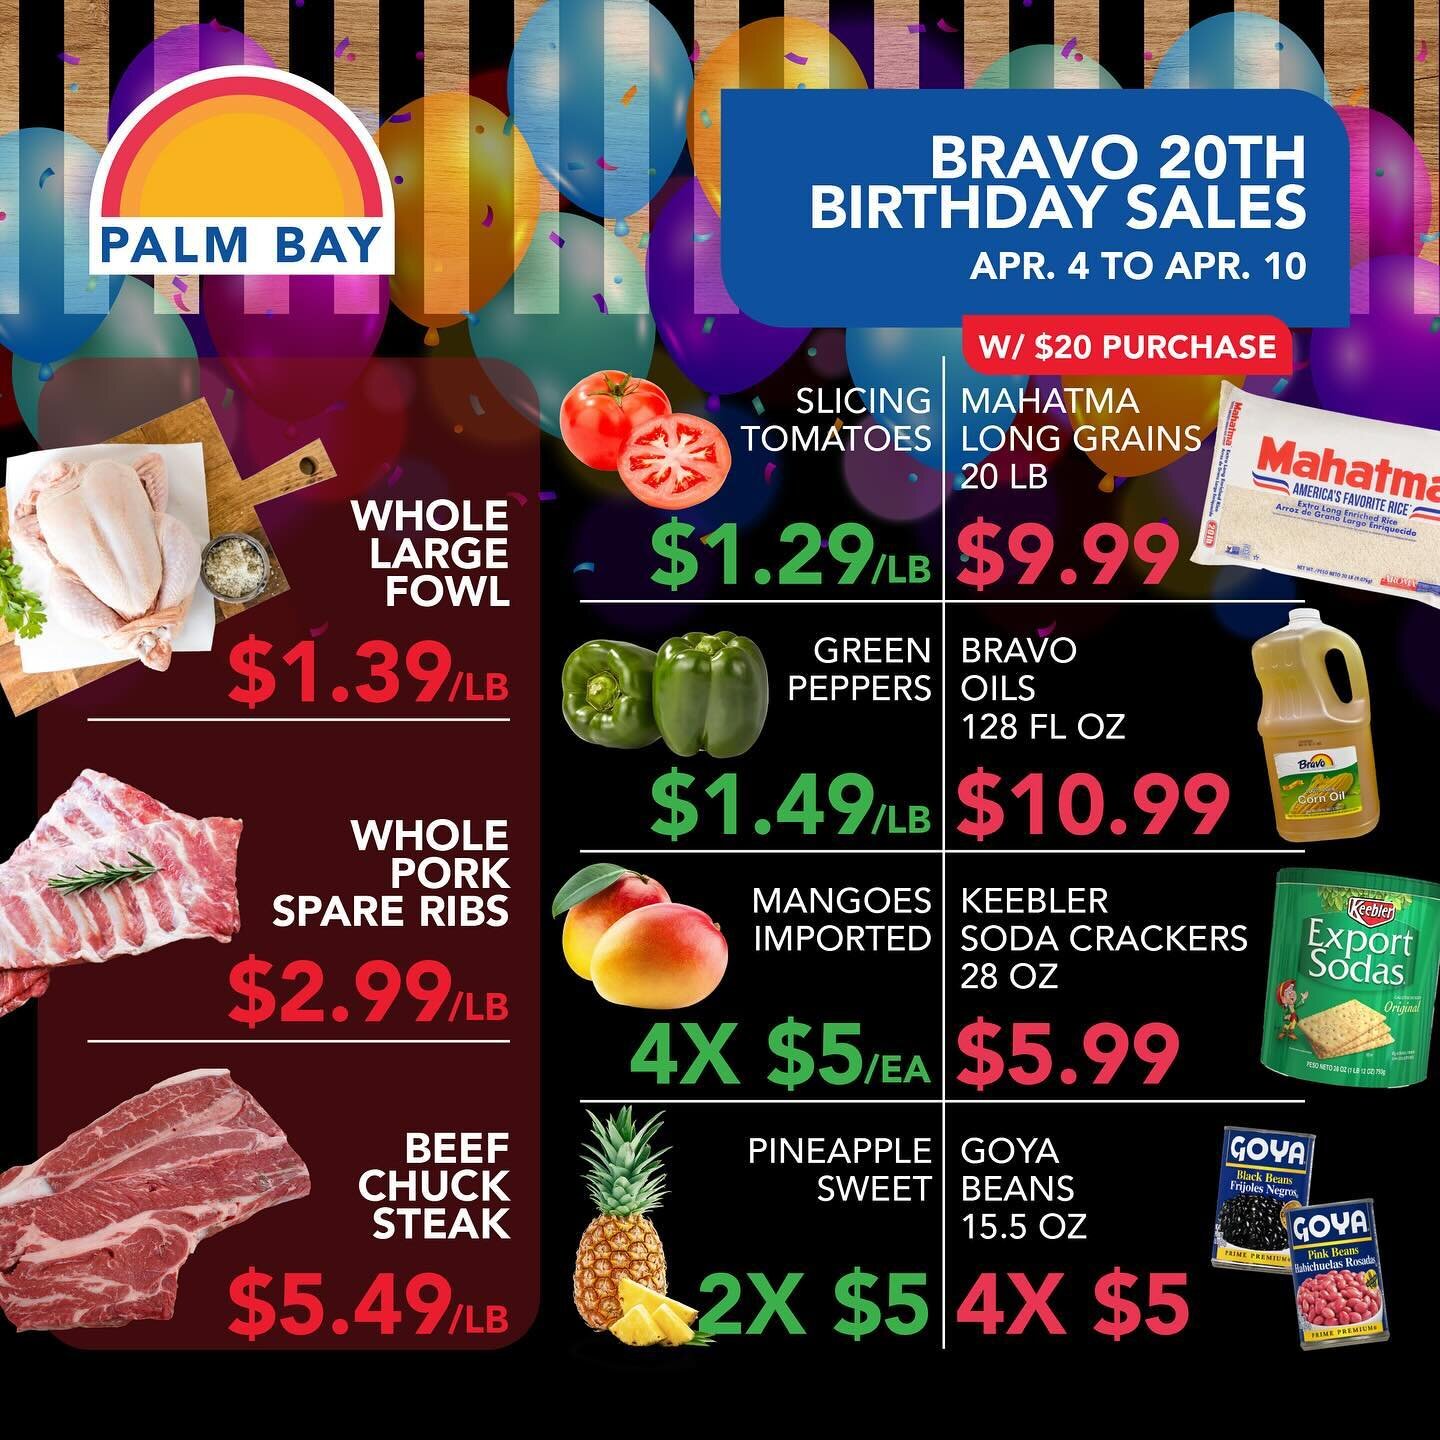 BRAVO 20TH
BIRTHDAY SALES!

Here are some amazing deals to celebrate the 20th Birthday of the Bravo Brand in Florida.

From Apr. 4th to the 10th.

🛒🎉🛒🎊🛒🎉

VENTAS DE LOS
20 A&Ntilde;OS DE BRAVO!

Ac&aacute; est&aacute;n unos especiales magnifico